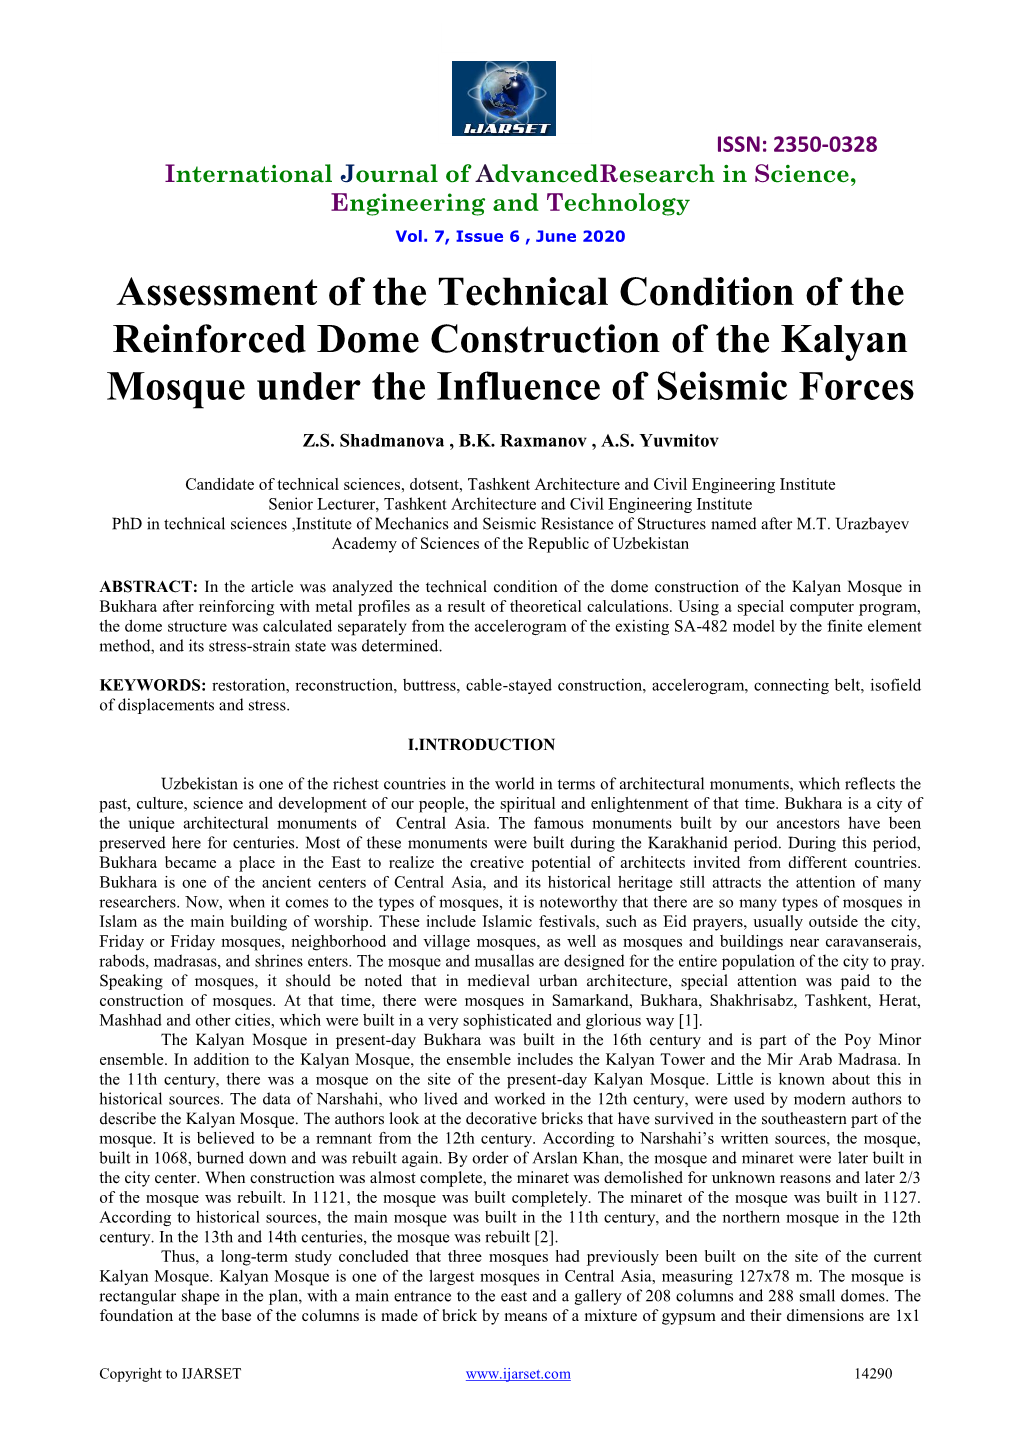 Assessment of the Technical Condition of the Reinforced Dome Construction of the Kalyan Mosque Under the Influence of Seismic Forces